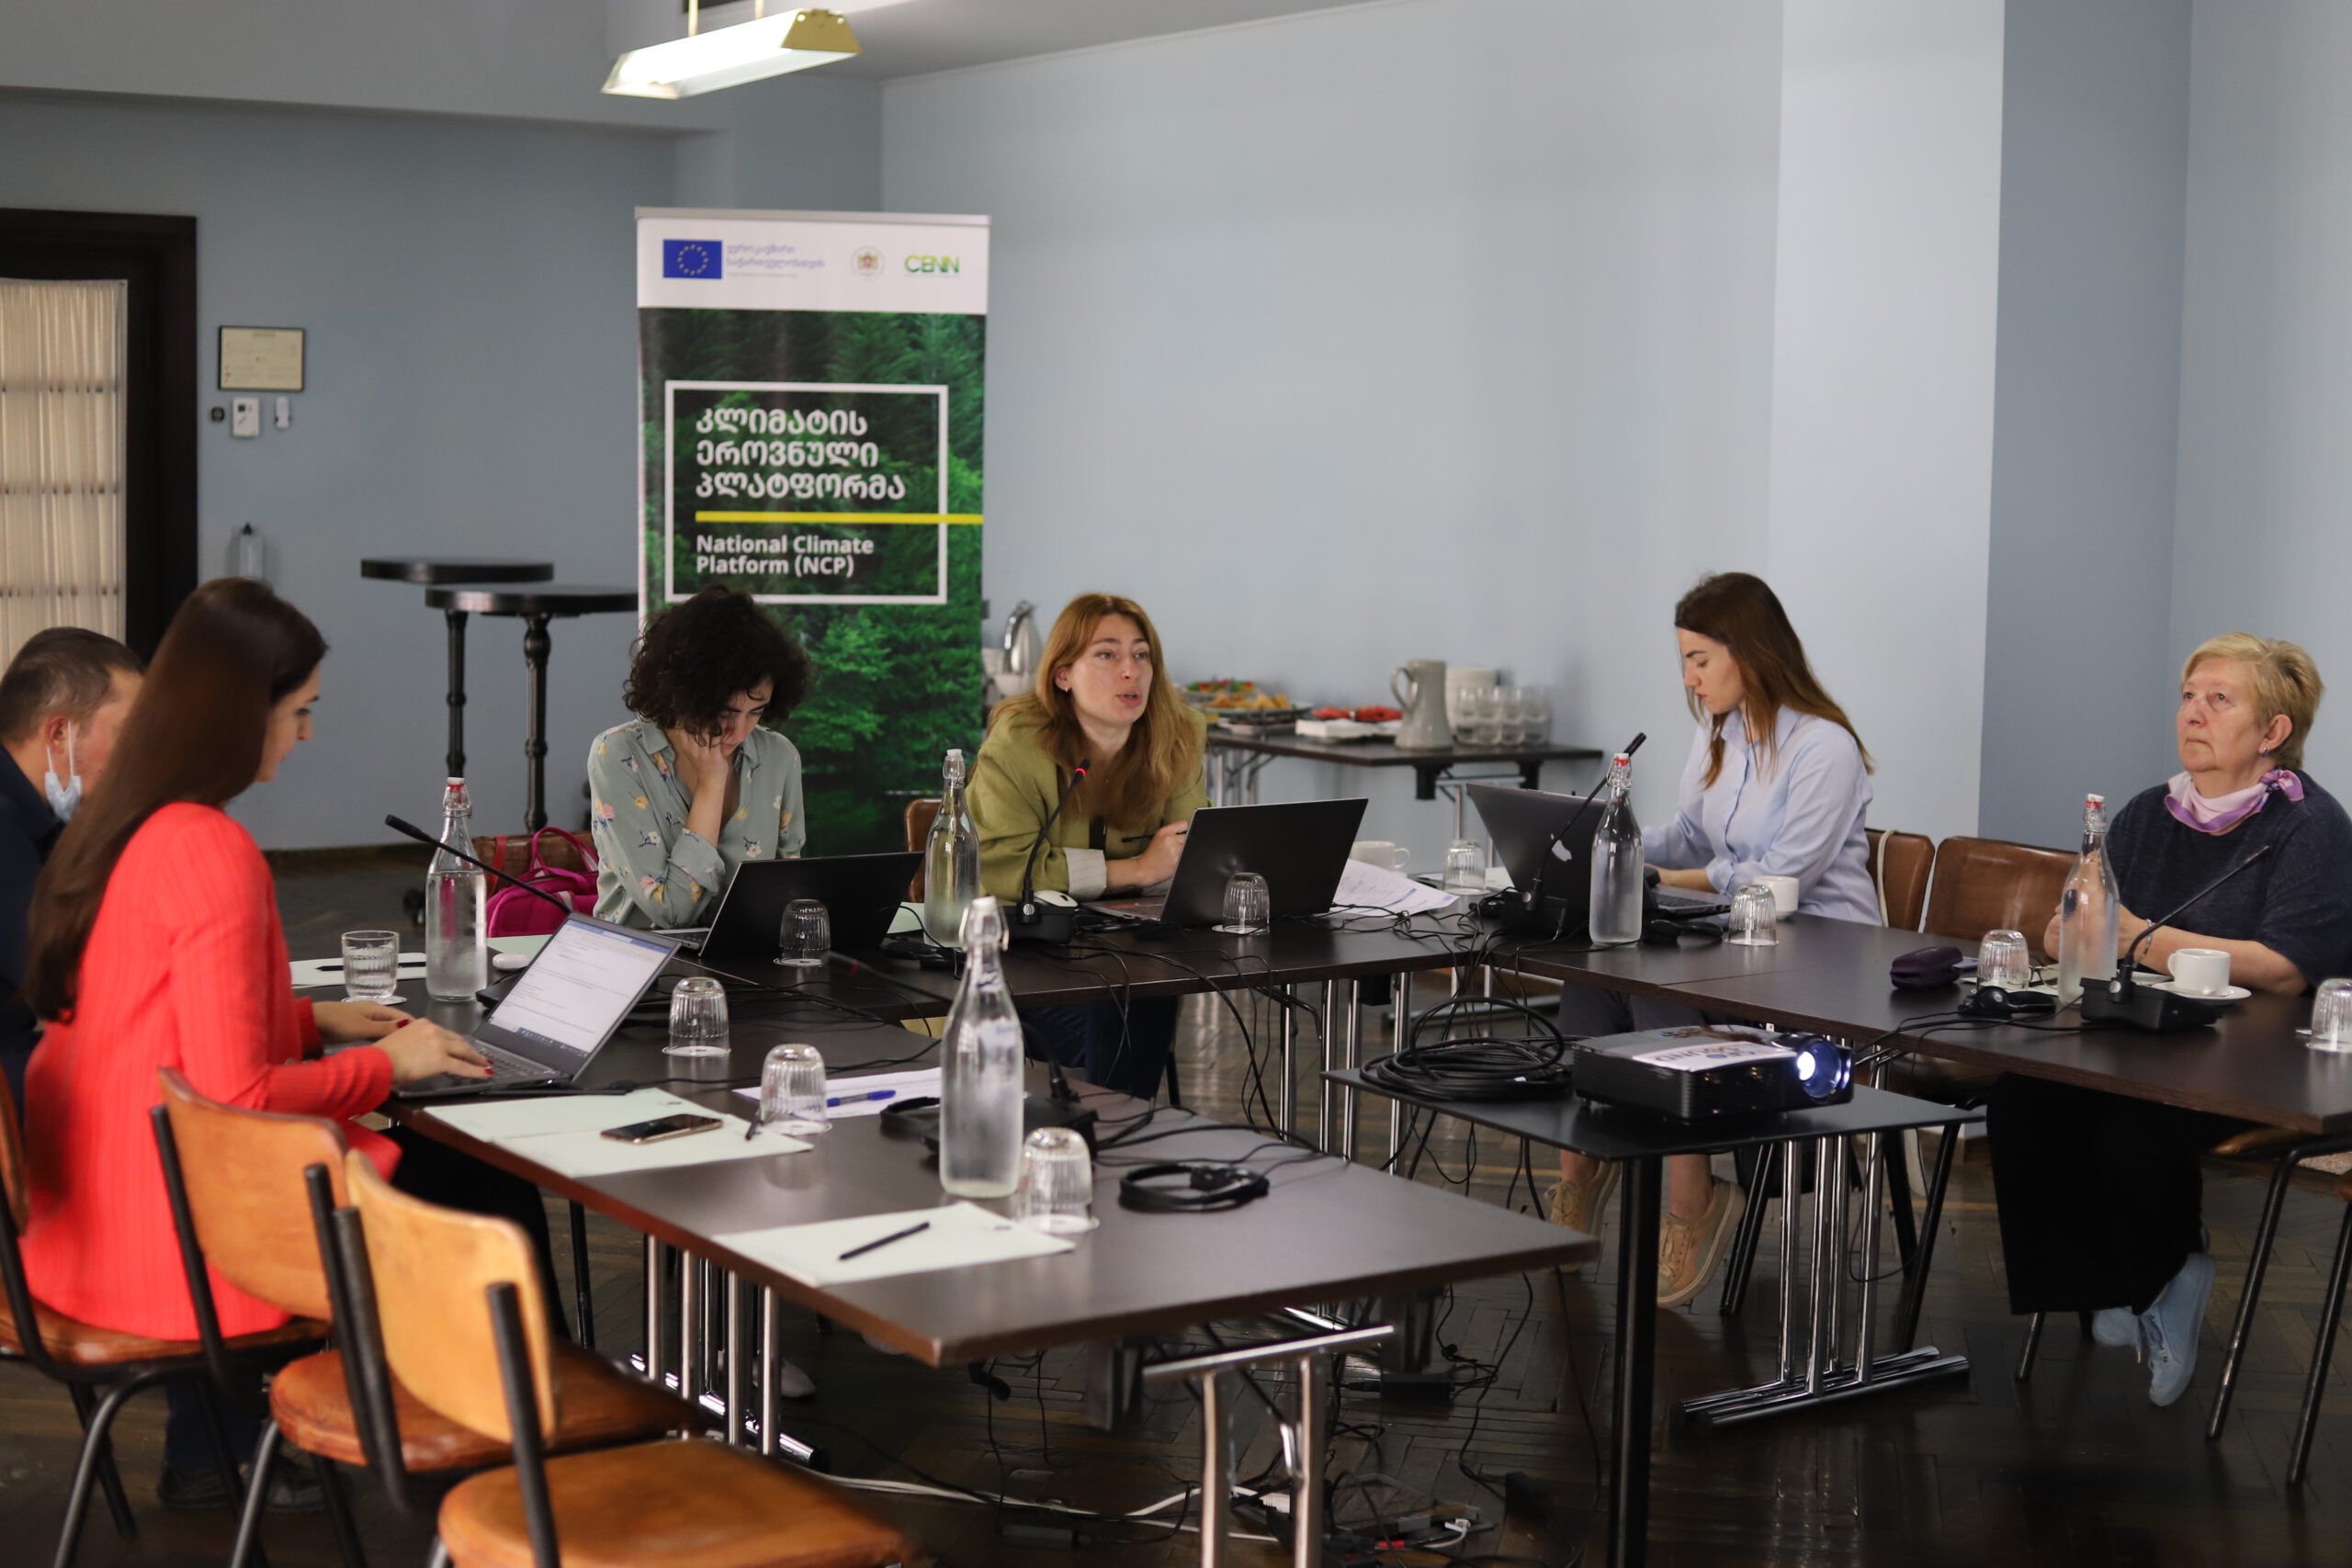 With the Support of the EU, the Ministry of Environment and Agriculture of Georgia and CENN Hosted Fourth Meeting of the National Climate Platform (NCP)